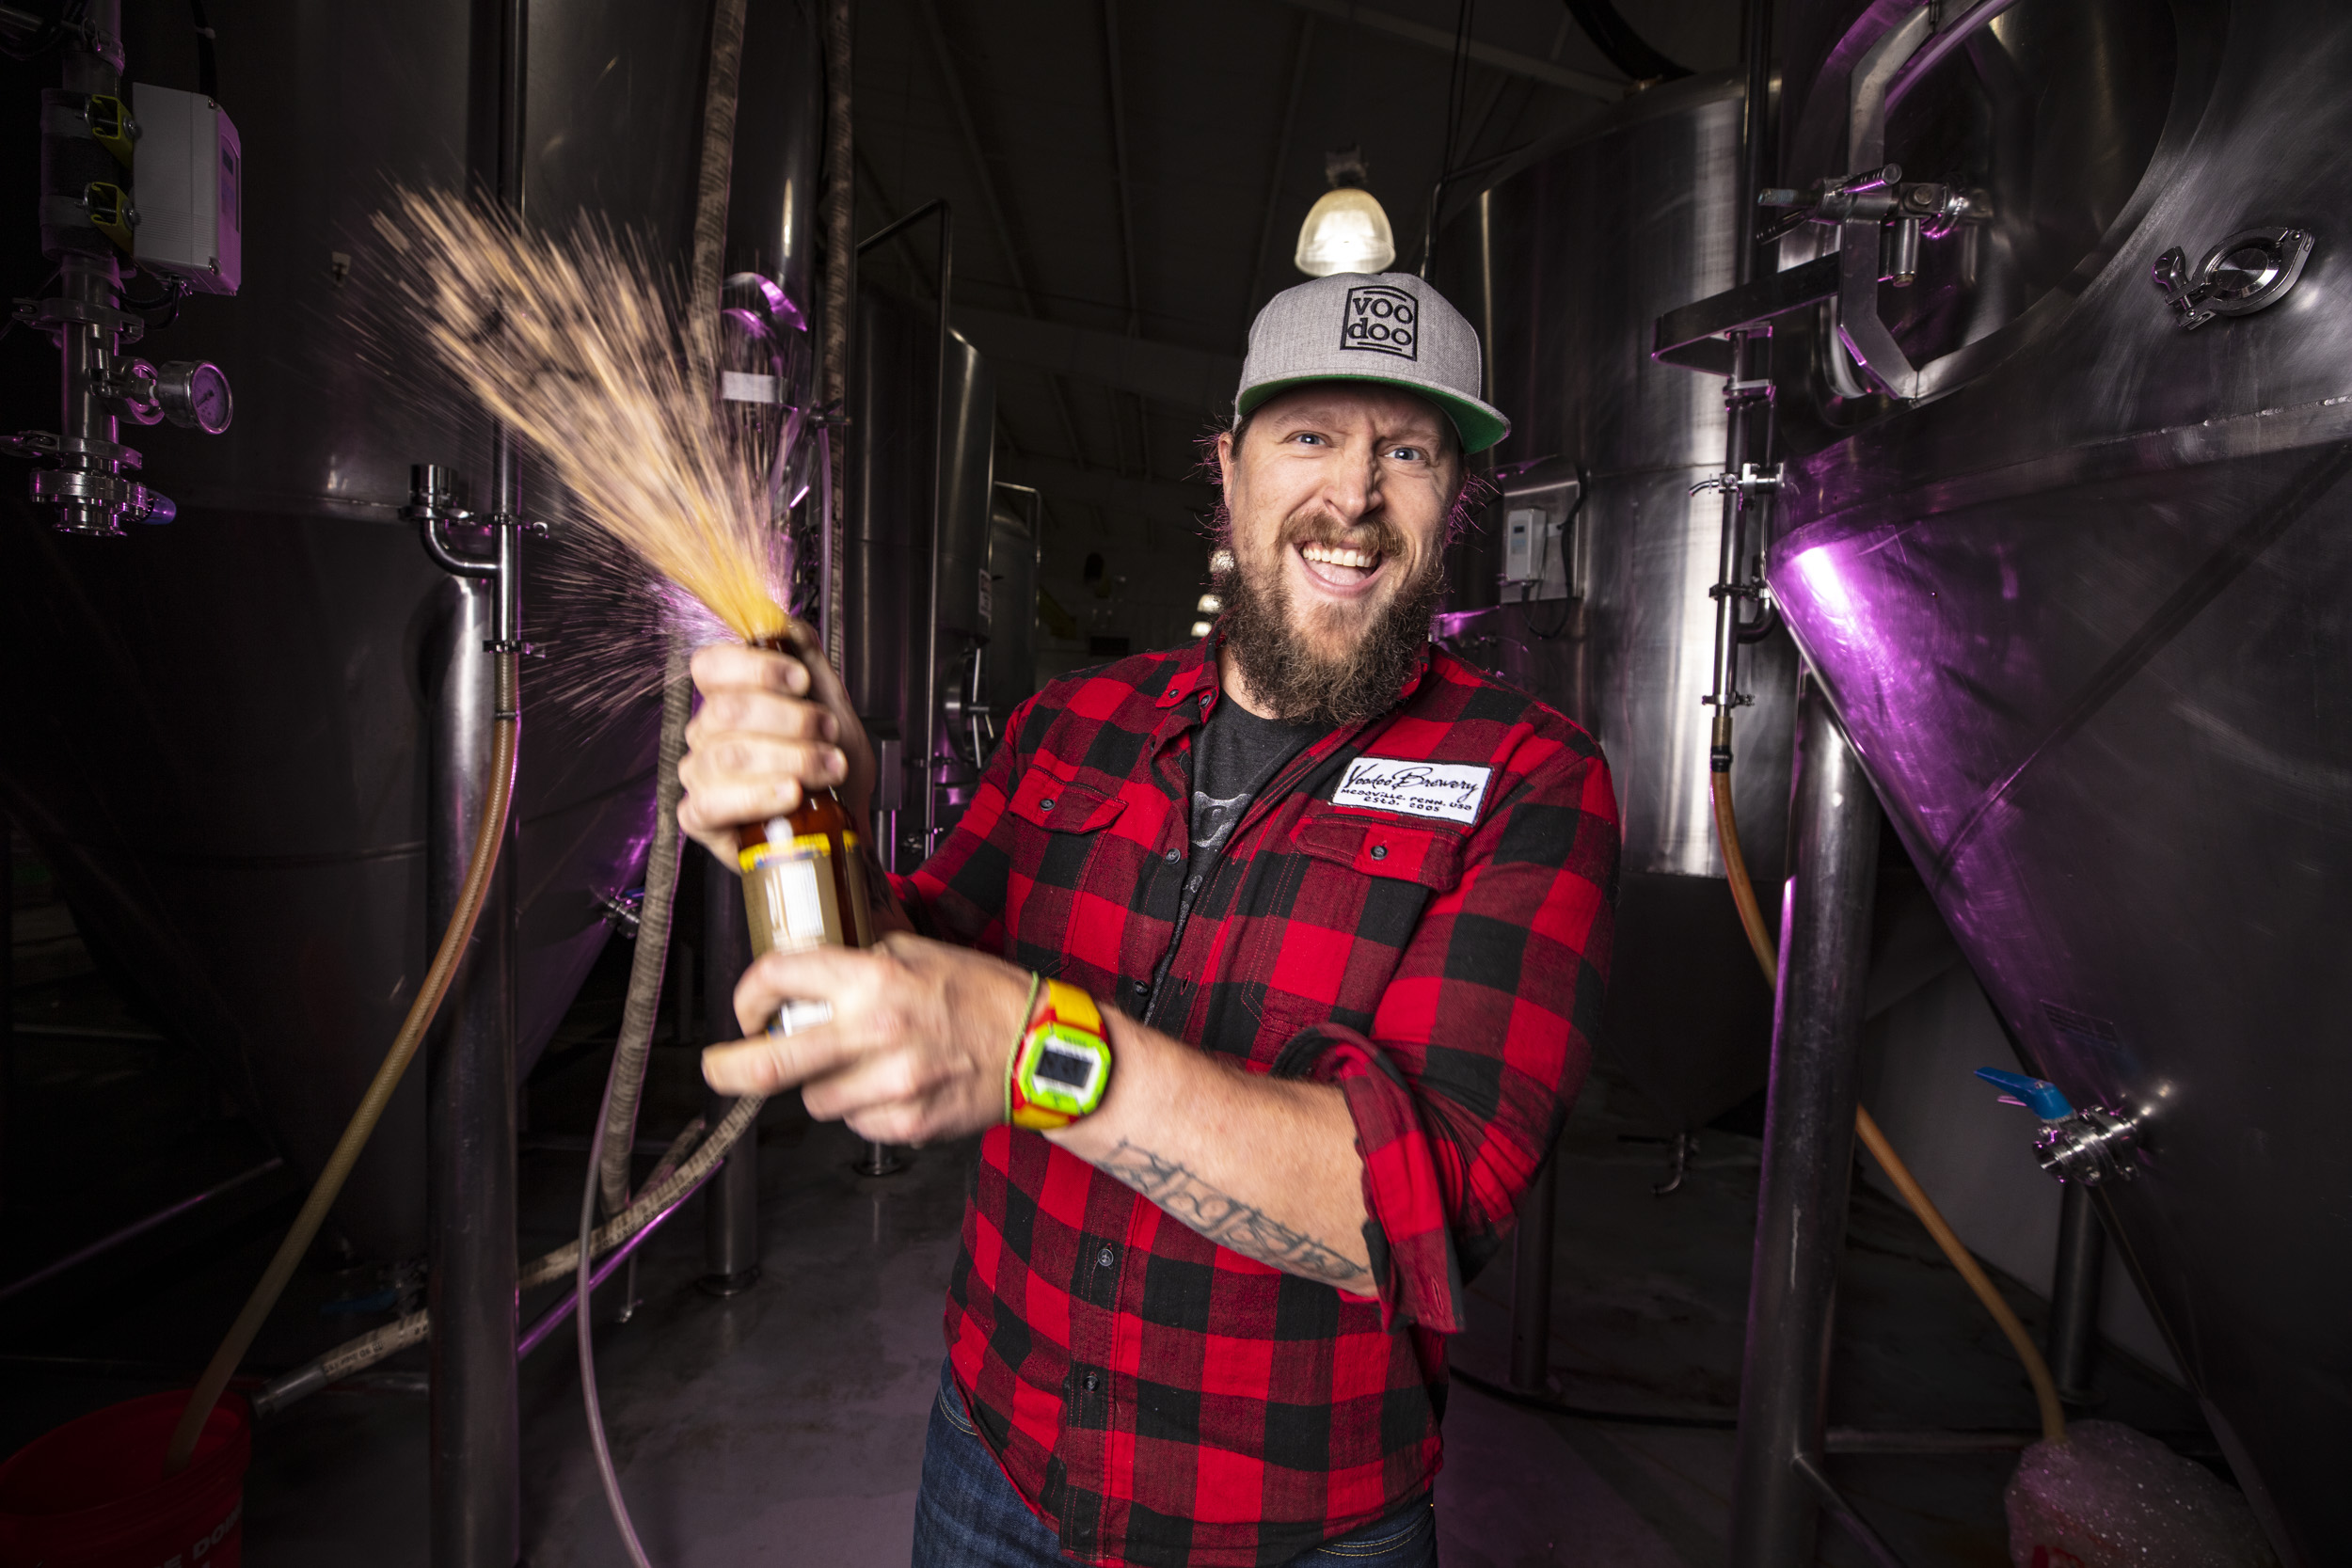 Environmental portrait of craft brewmaster at voodoo brewing